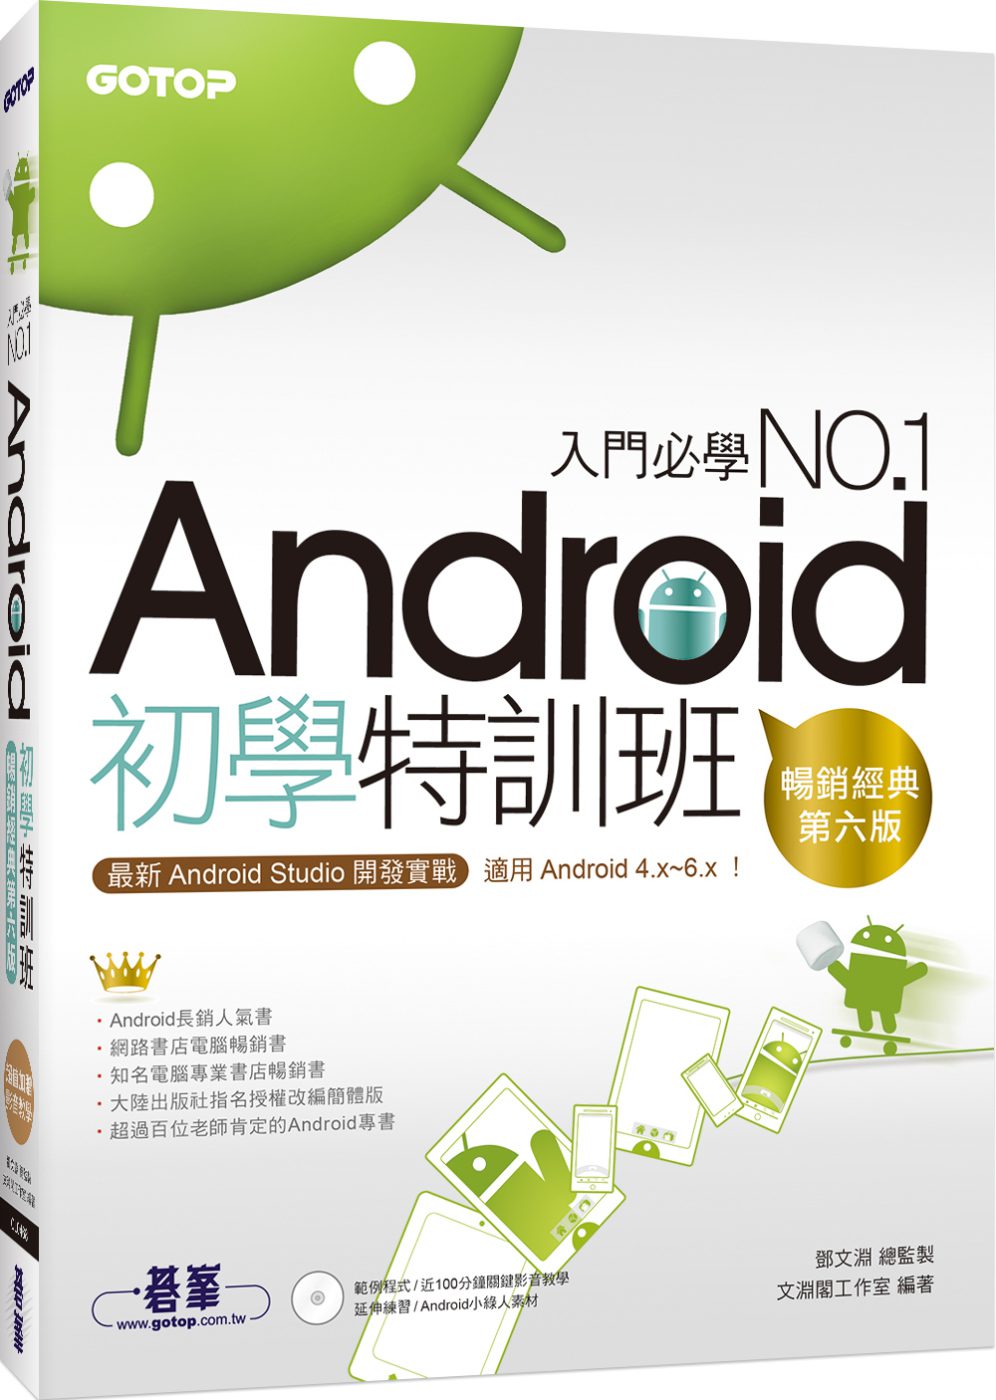 Android初學特訓班：最新Android